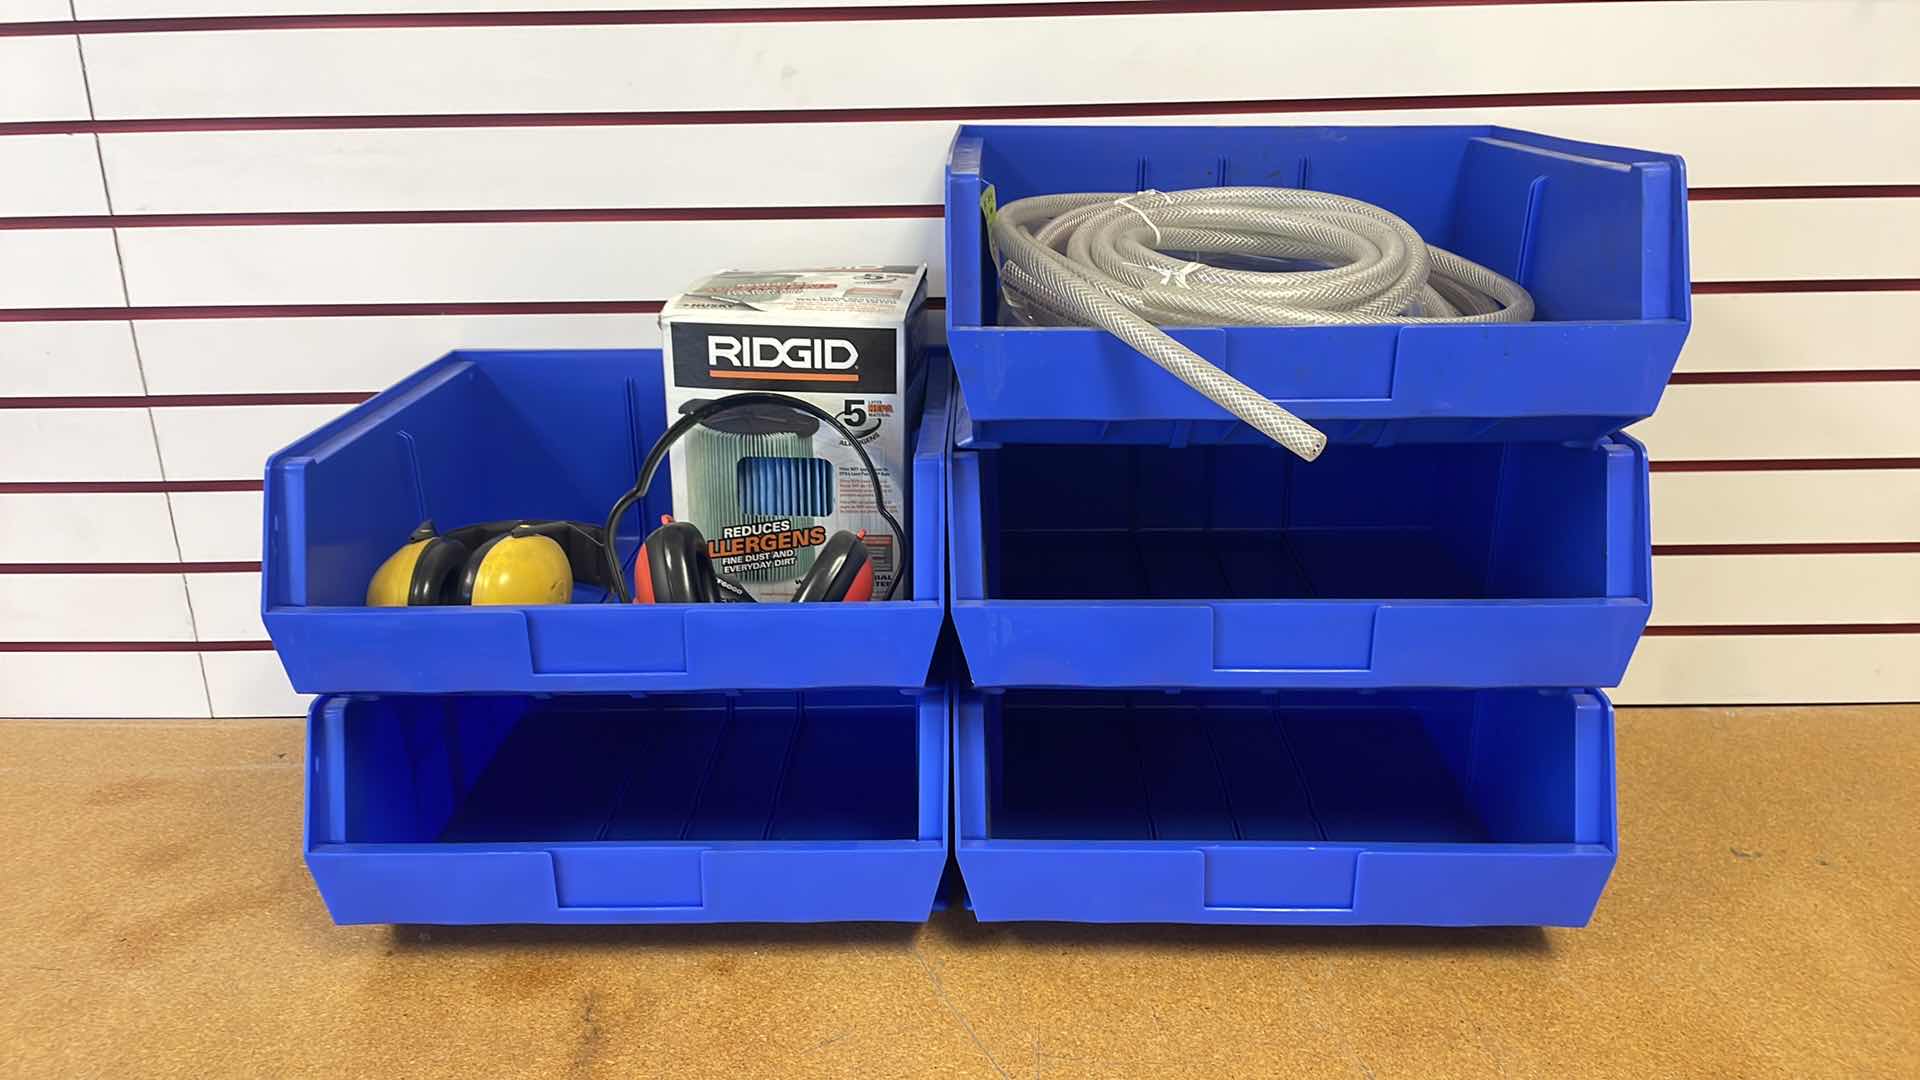 Photo 1 of DURHAM 16-1/2” x 14-1/2” x 7” STACKABLE BINS WITH ASSORTMENT OF HOSES HEARING PROTECTION AND RIDGID WET/DRY VACUUM FILTER